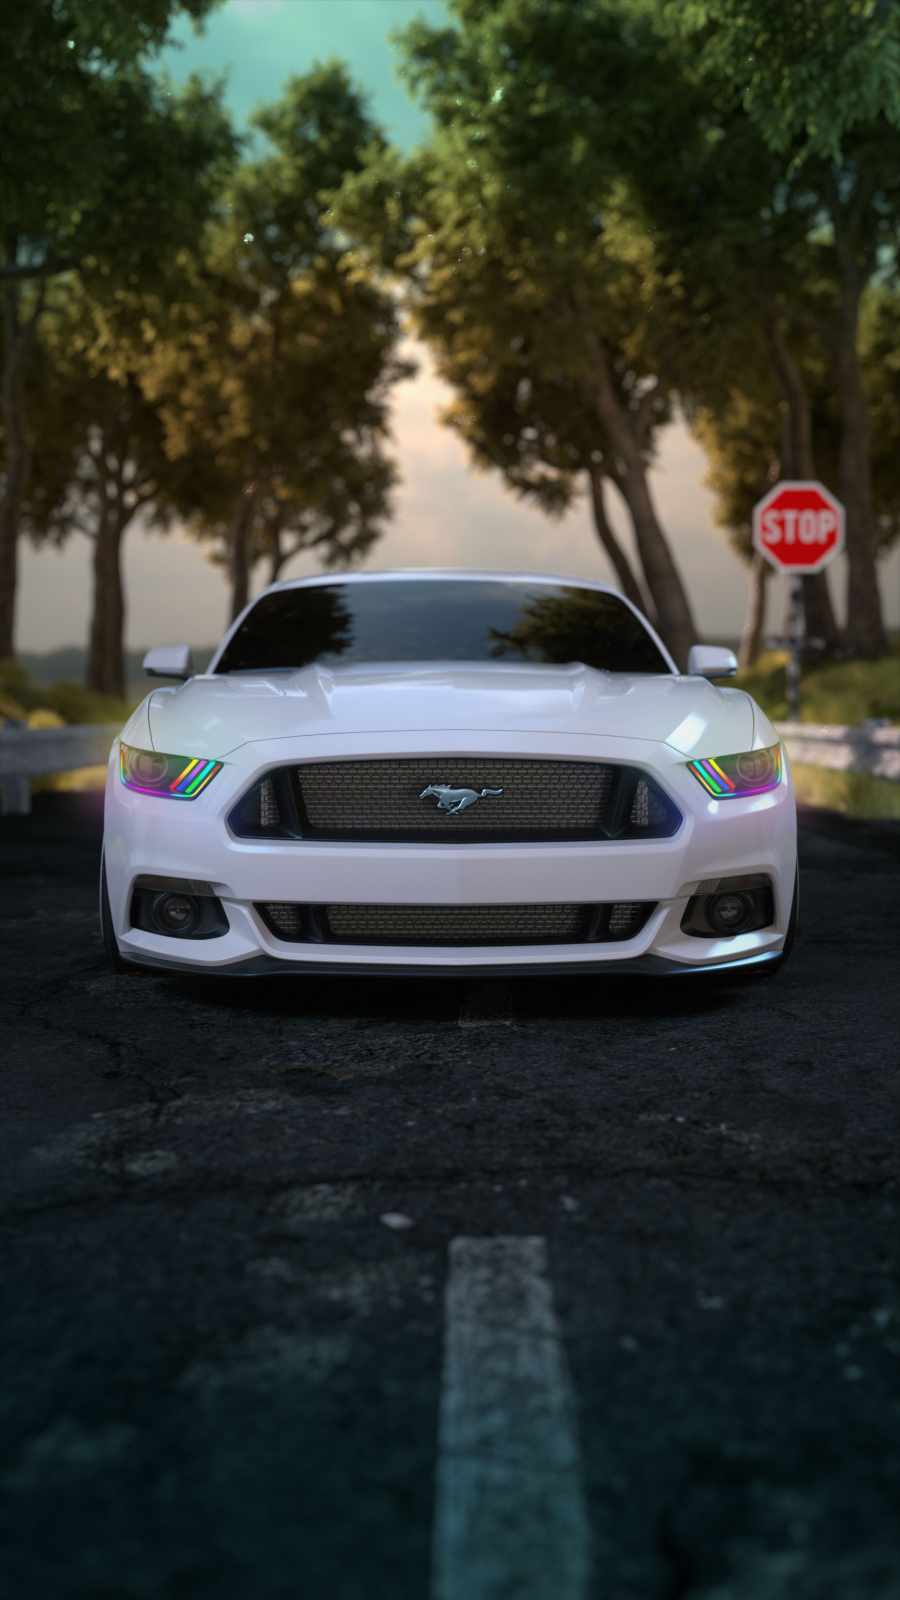 Ford Mustang RGB Lights iPhone Wallpaper